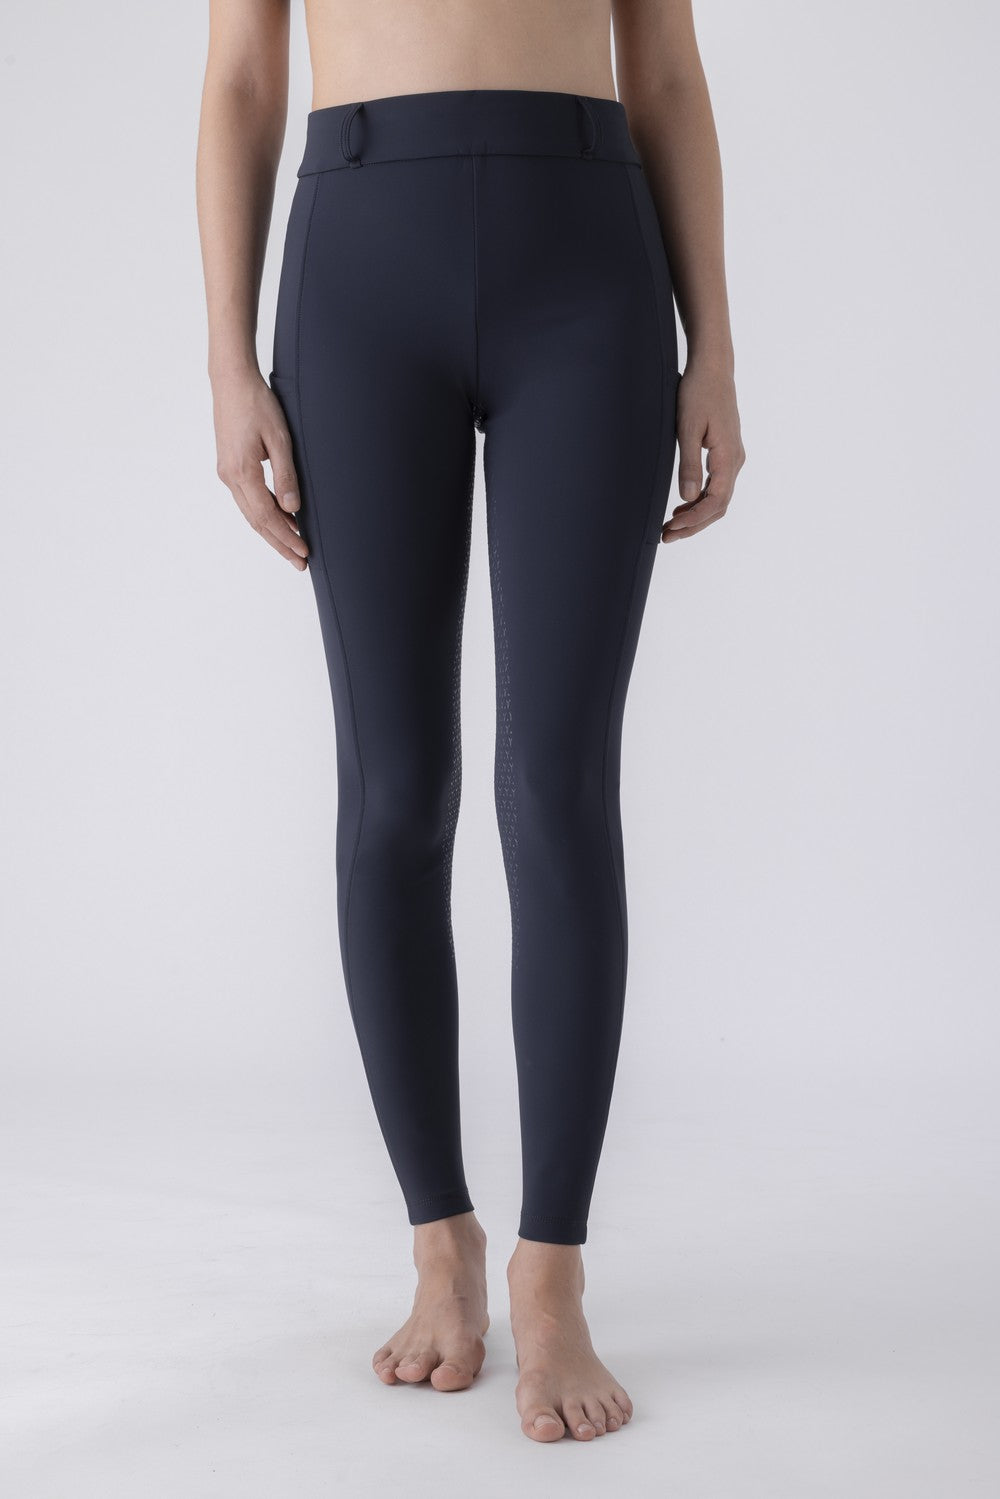 Equiline Pull on winter riding breeches full grip ladies Cirtef Navy